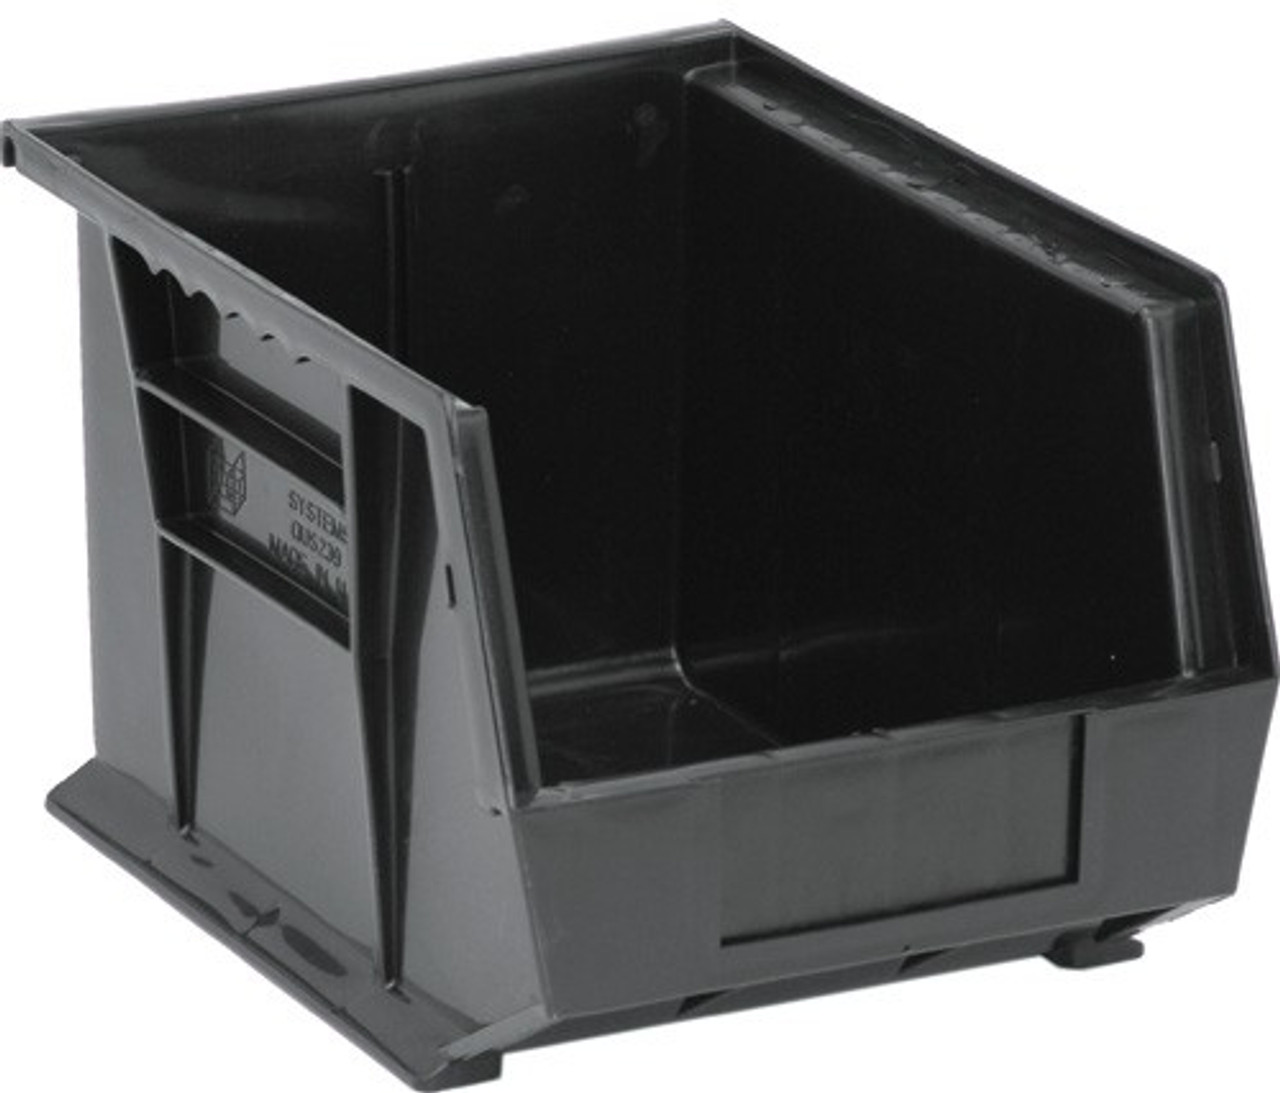 STACK ON 8 x 6 x 1 3/4' Plastic Box 10 Compartments